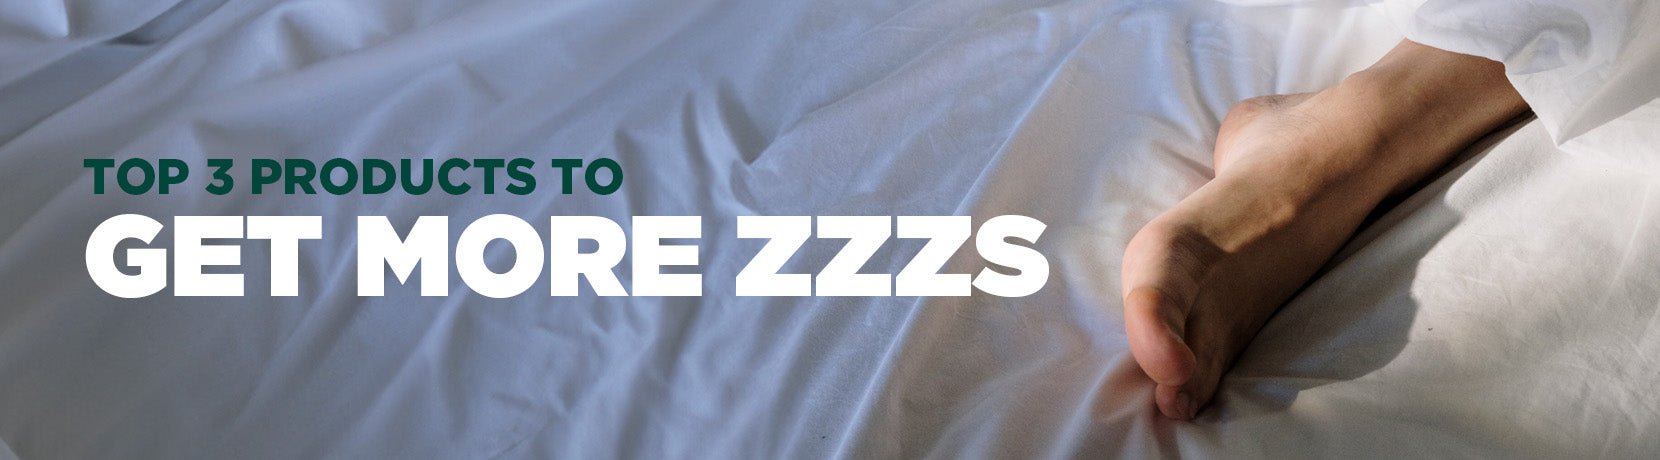 Celebrate World Sleep Day: Top 3 Products to Get More ZZZs - Shop CBD Kratom